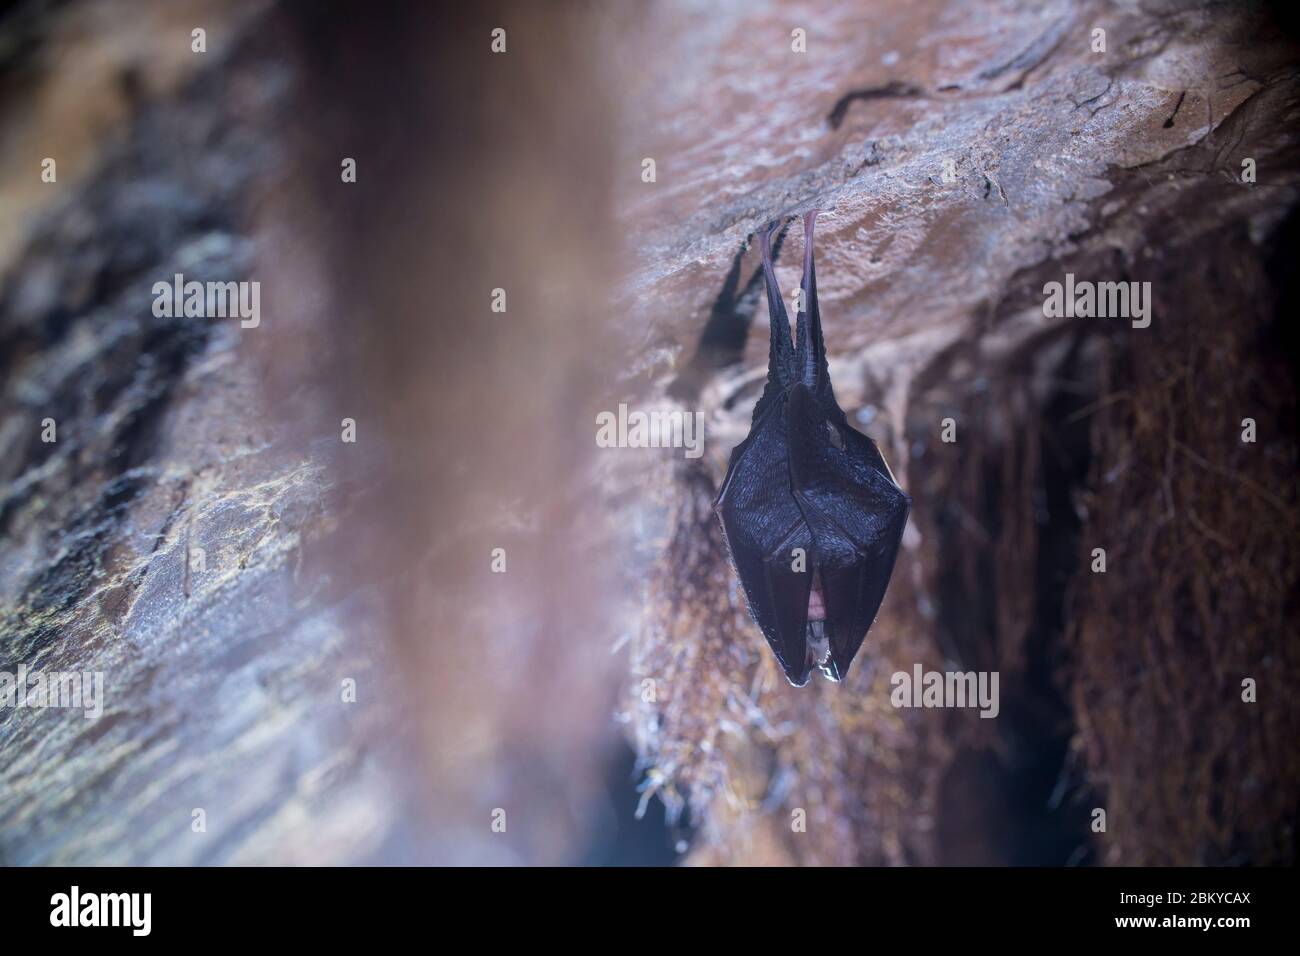 Close up small lesser horseshoe bat covered by wings, hanging upside down on top of by roots growth arched cellar while hibernating. Creative wildlife Stock Photo